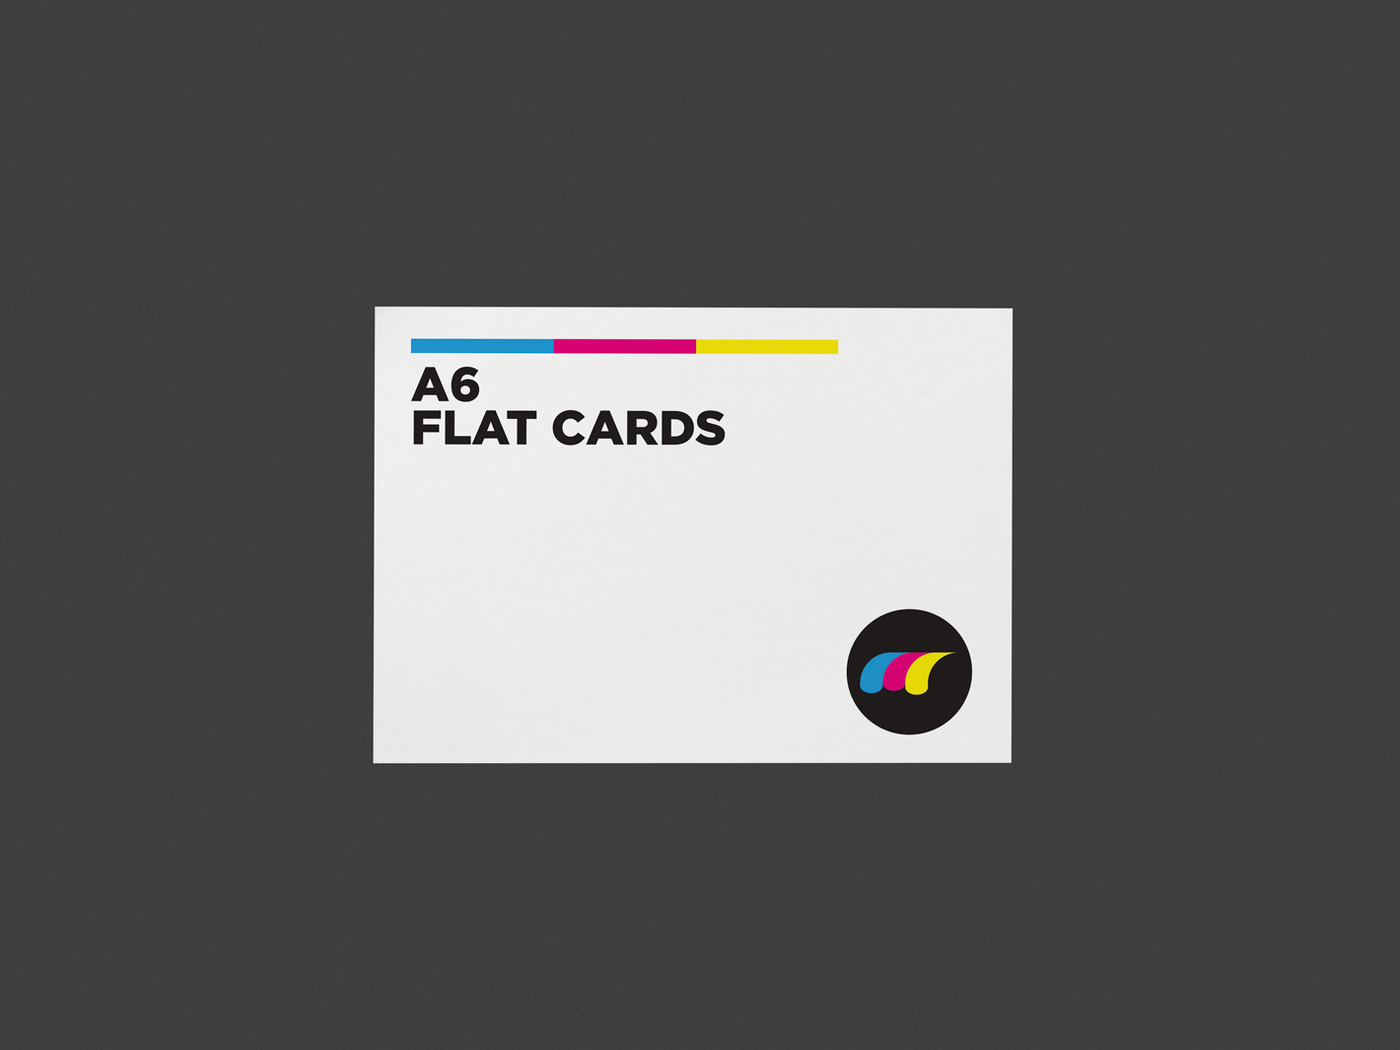 A6 Flat Cards